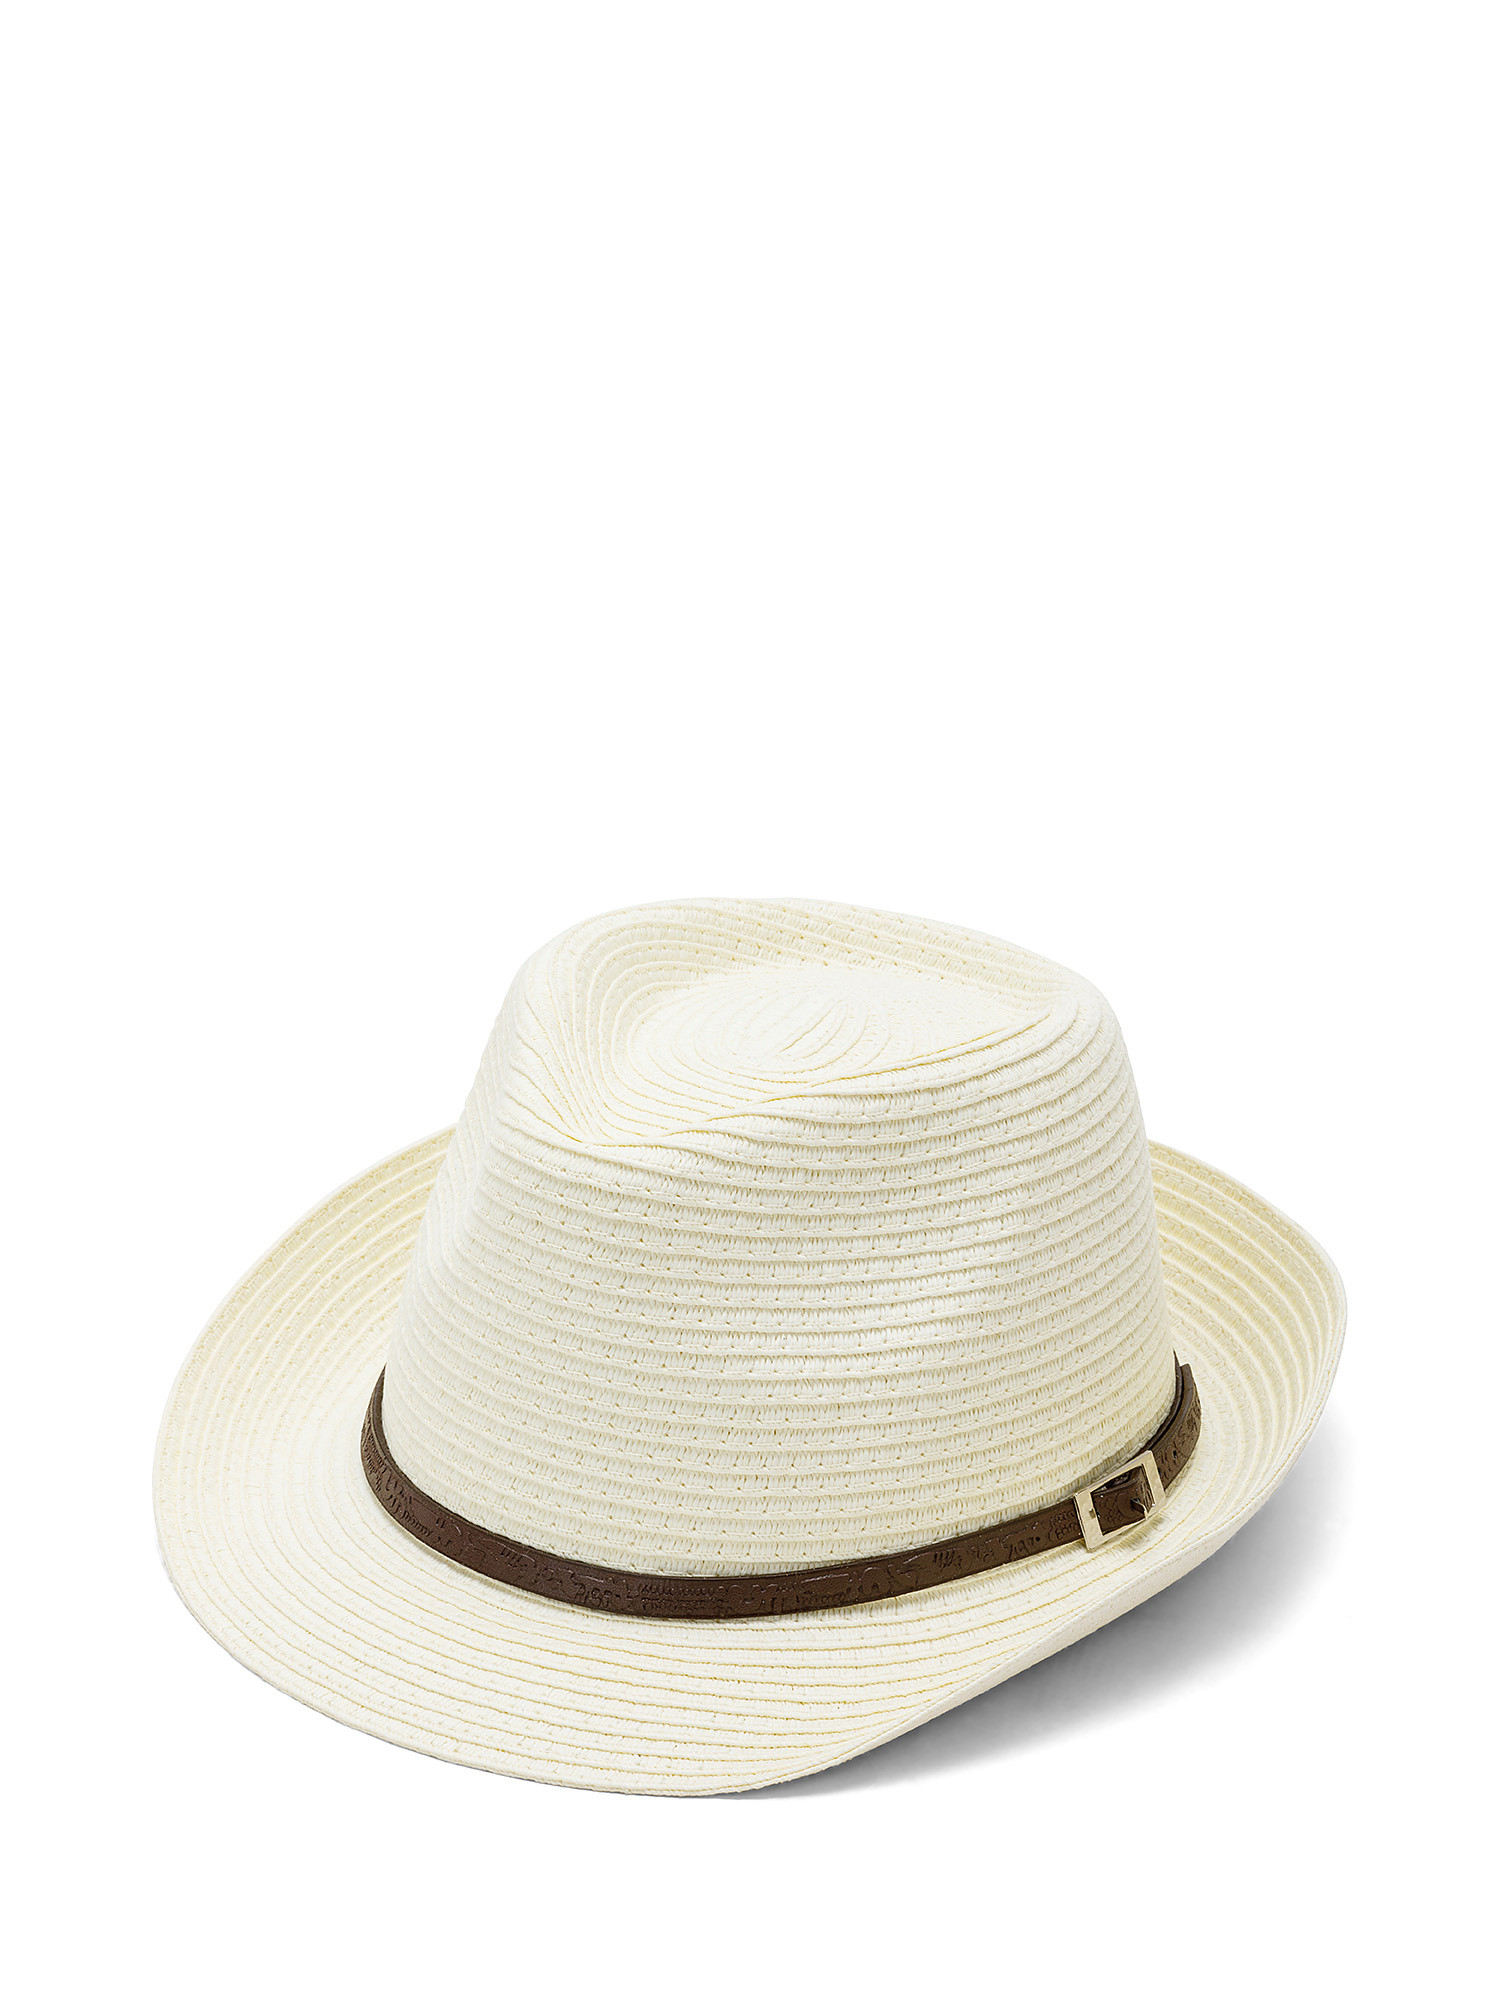 Luca D'Altieri - Alpinetto hat with strap, Natural, large image number 0